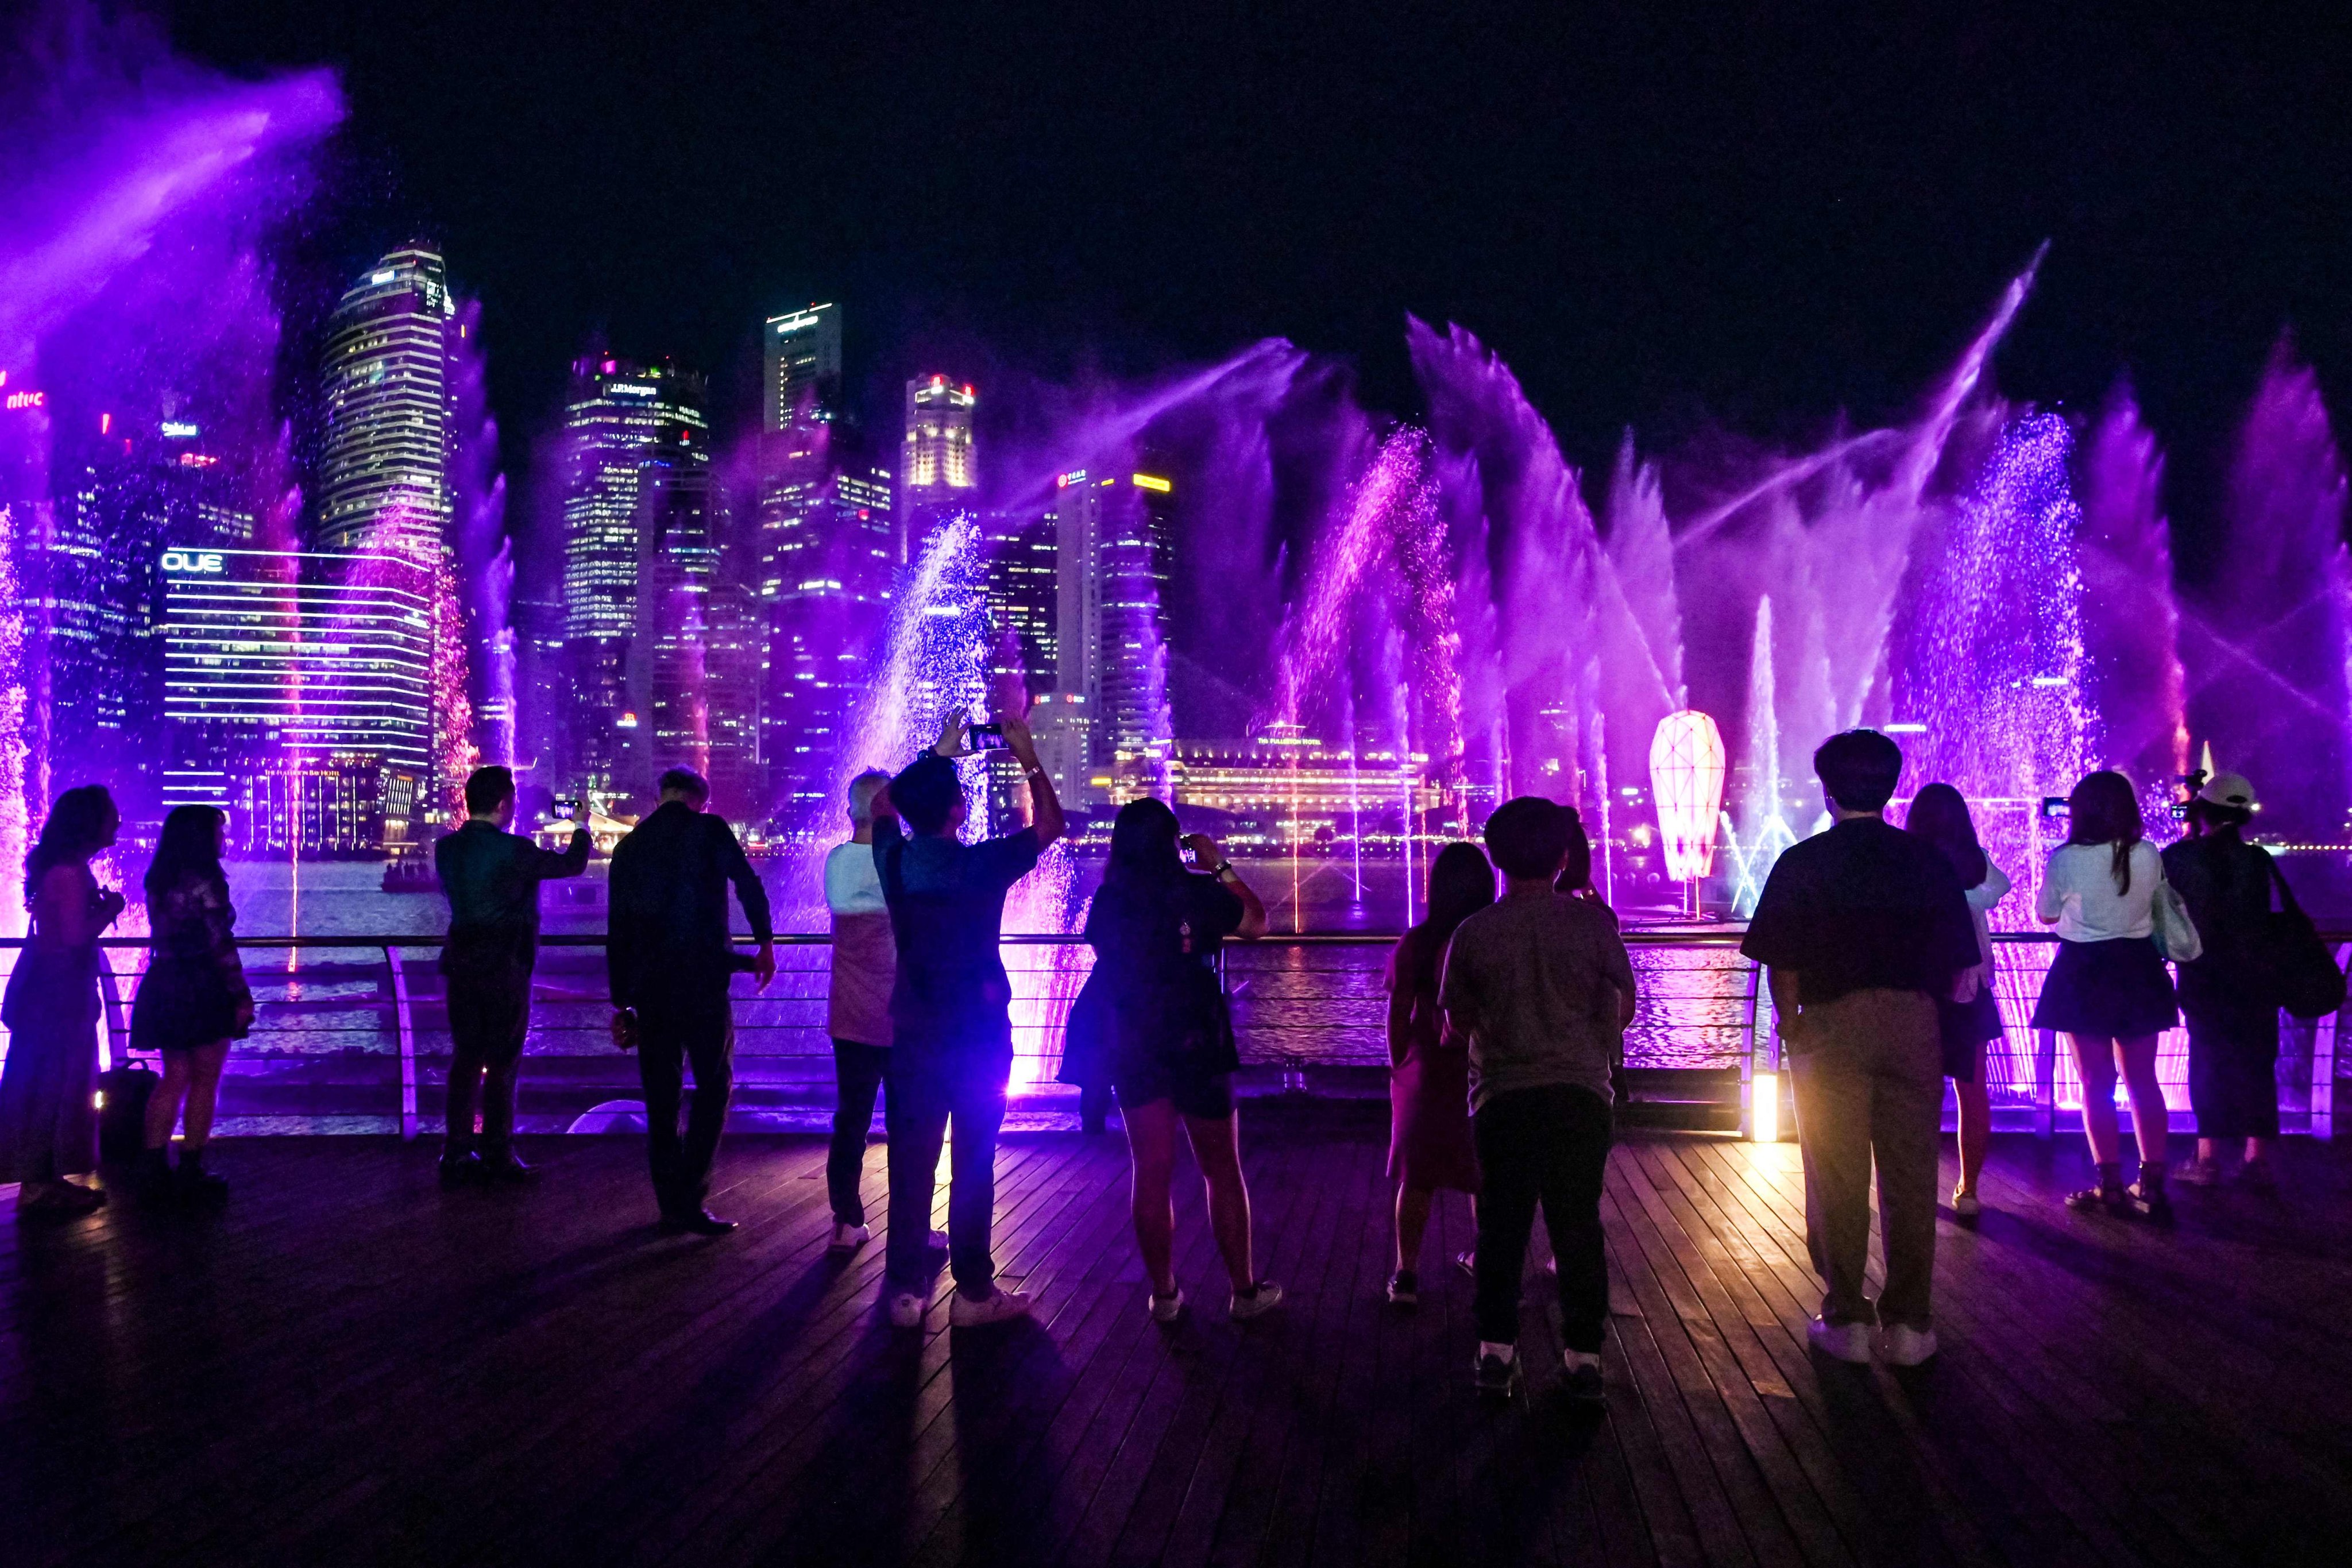 Fans of singer Taylor Swift watch a light and water show in the “Eras Tour Trail” that depicts different eras of the pop star’s career at Marina Bay Sands in Singapore on February 28. Photo: AFP